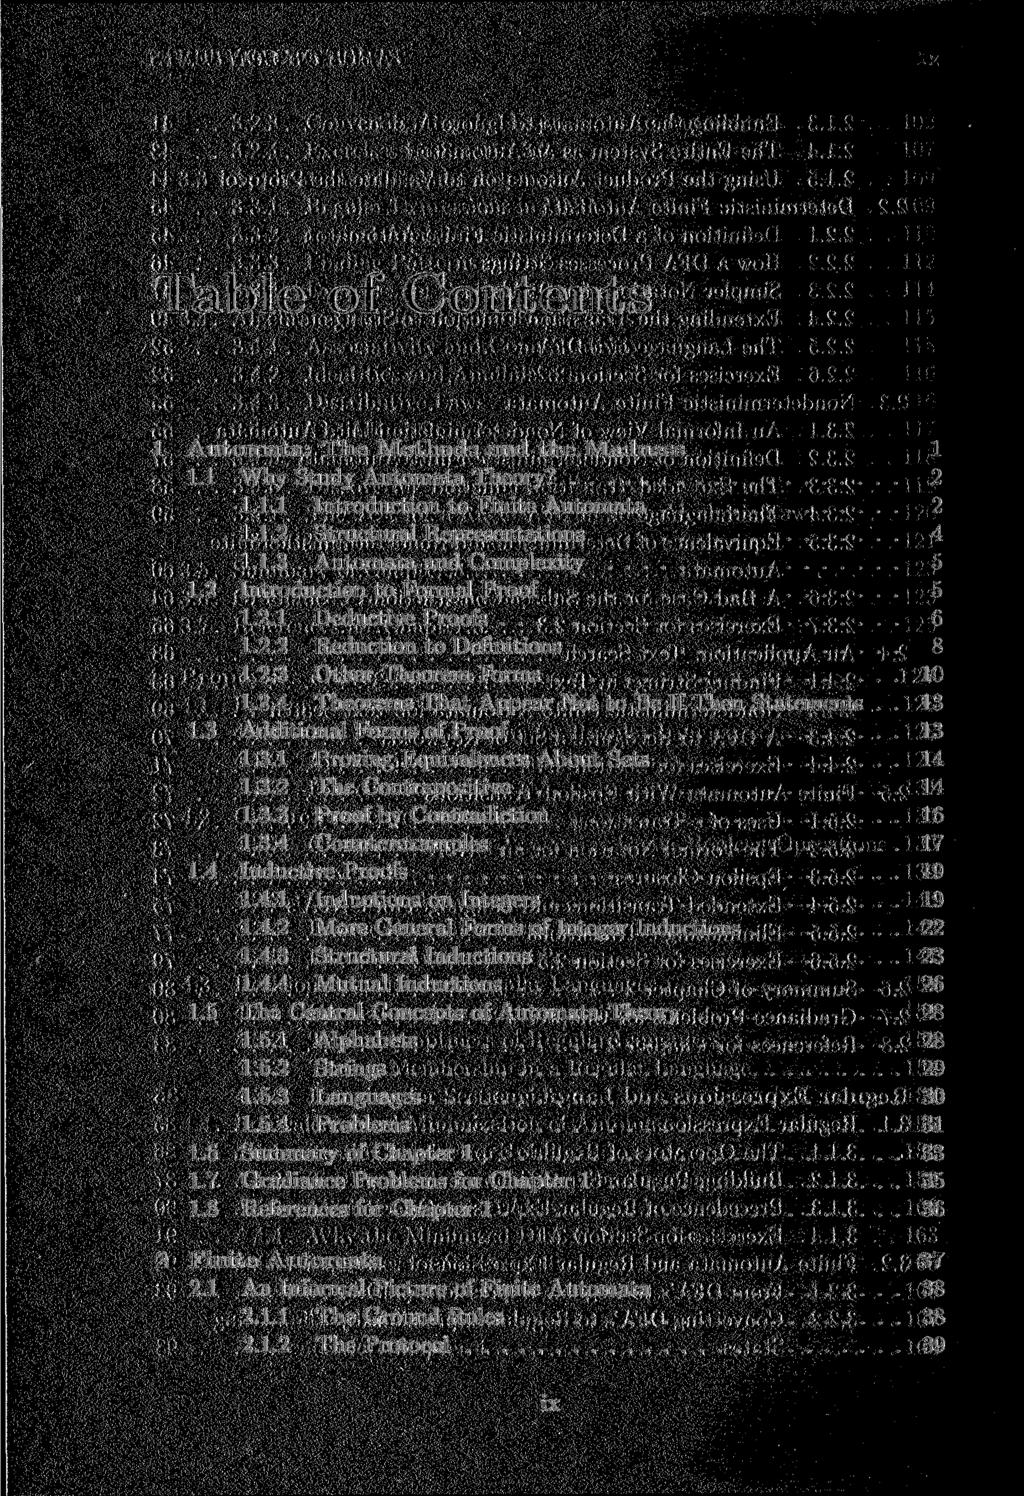 Table of Contents 1 Automata: The Methods and the Madness 1 1.1 Why Study Automata Theory? 2 1.1.1 Introduction to Finite Automata 2 1.1.2 Structural Representations 4 1.1.3 Automata and Complexity 5 1.